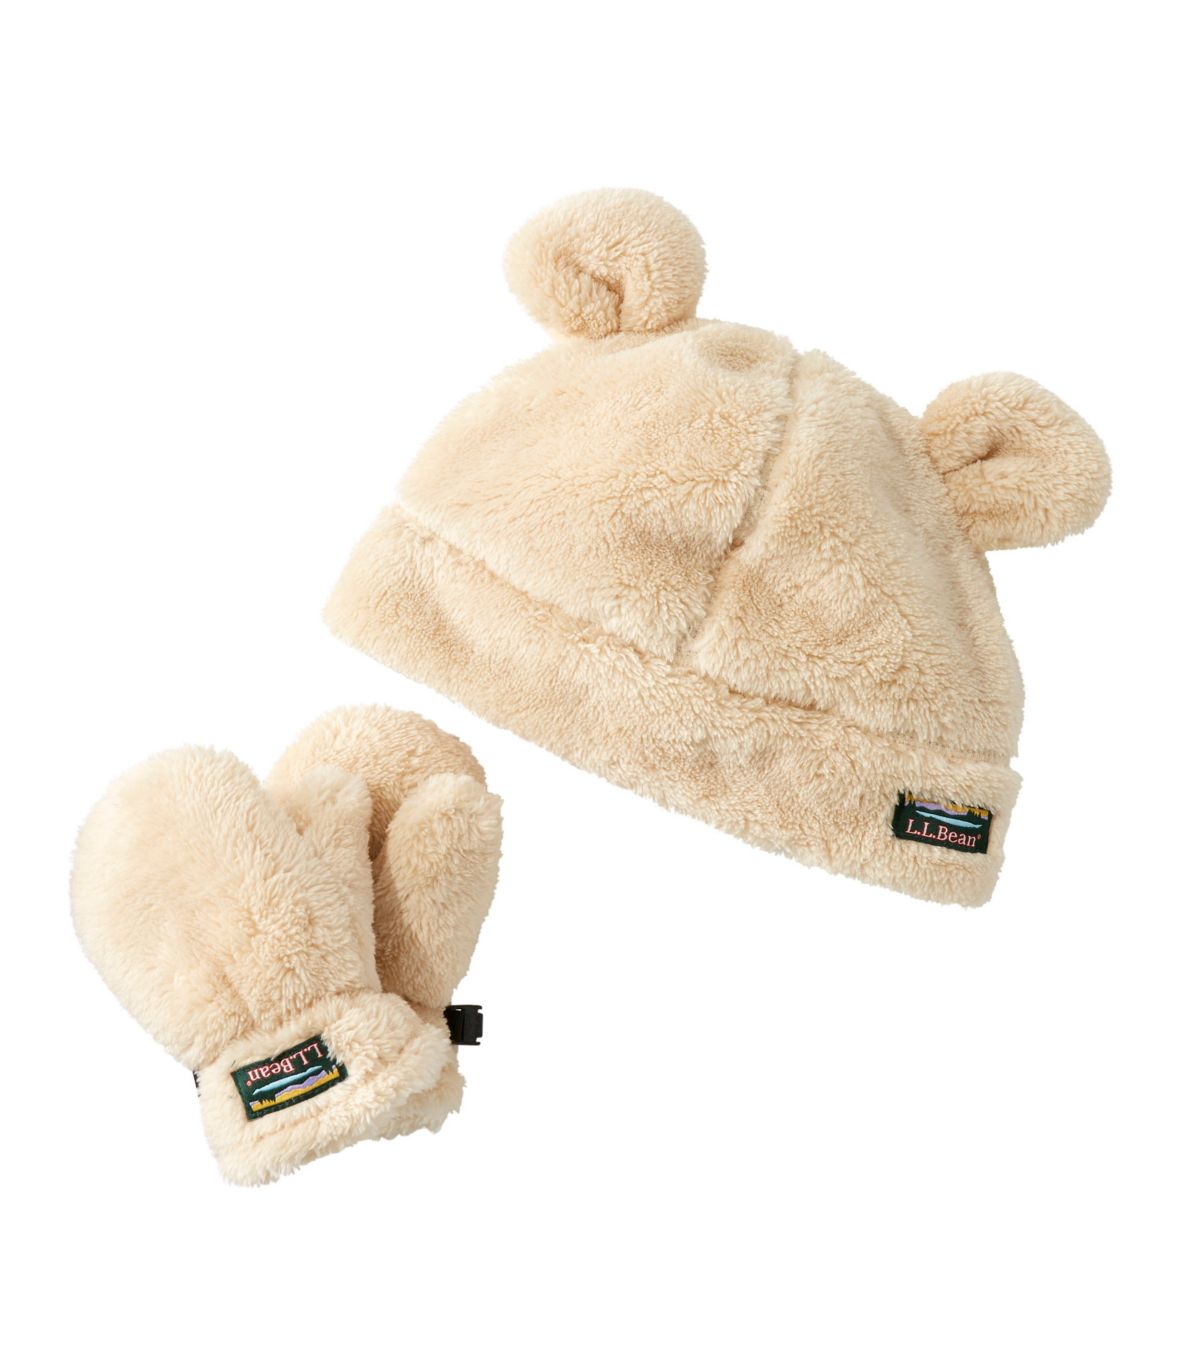 Toddlers' Hi-Pile Hat and Mitten Set